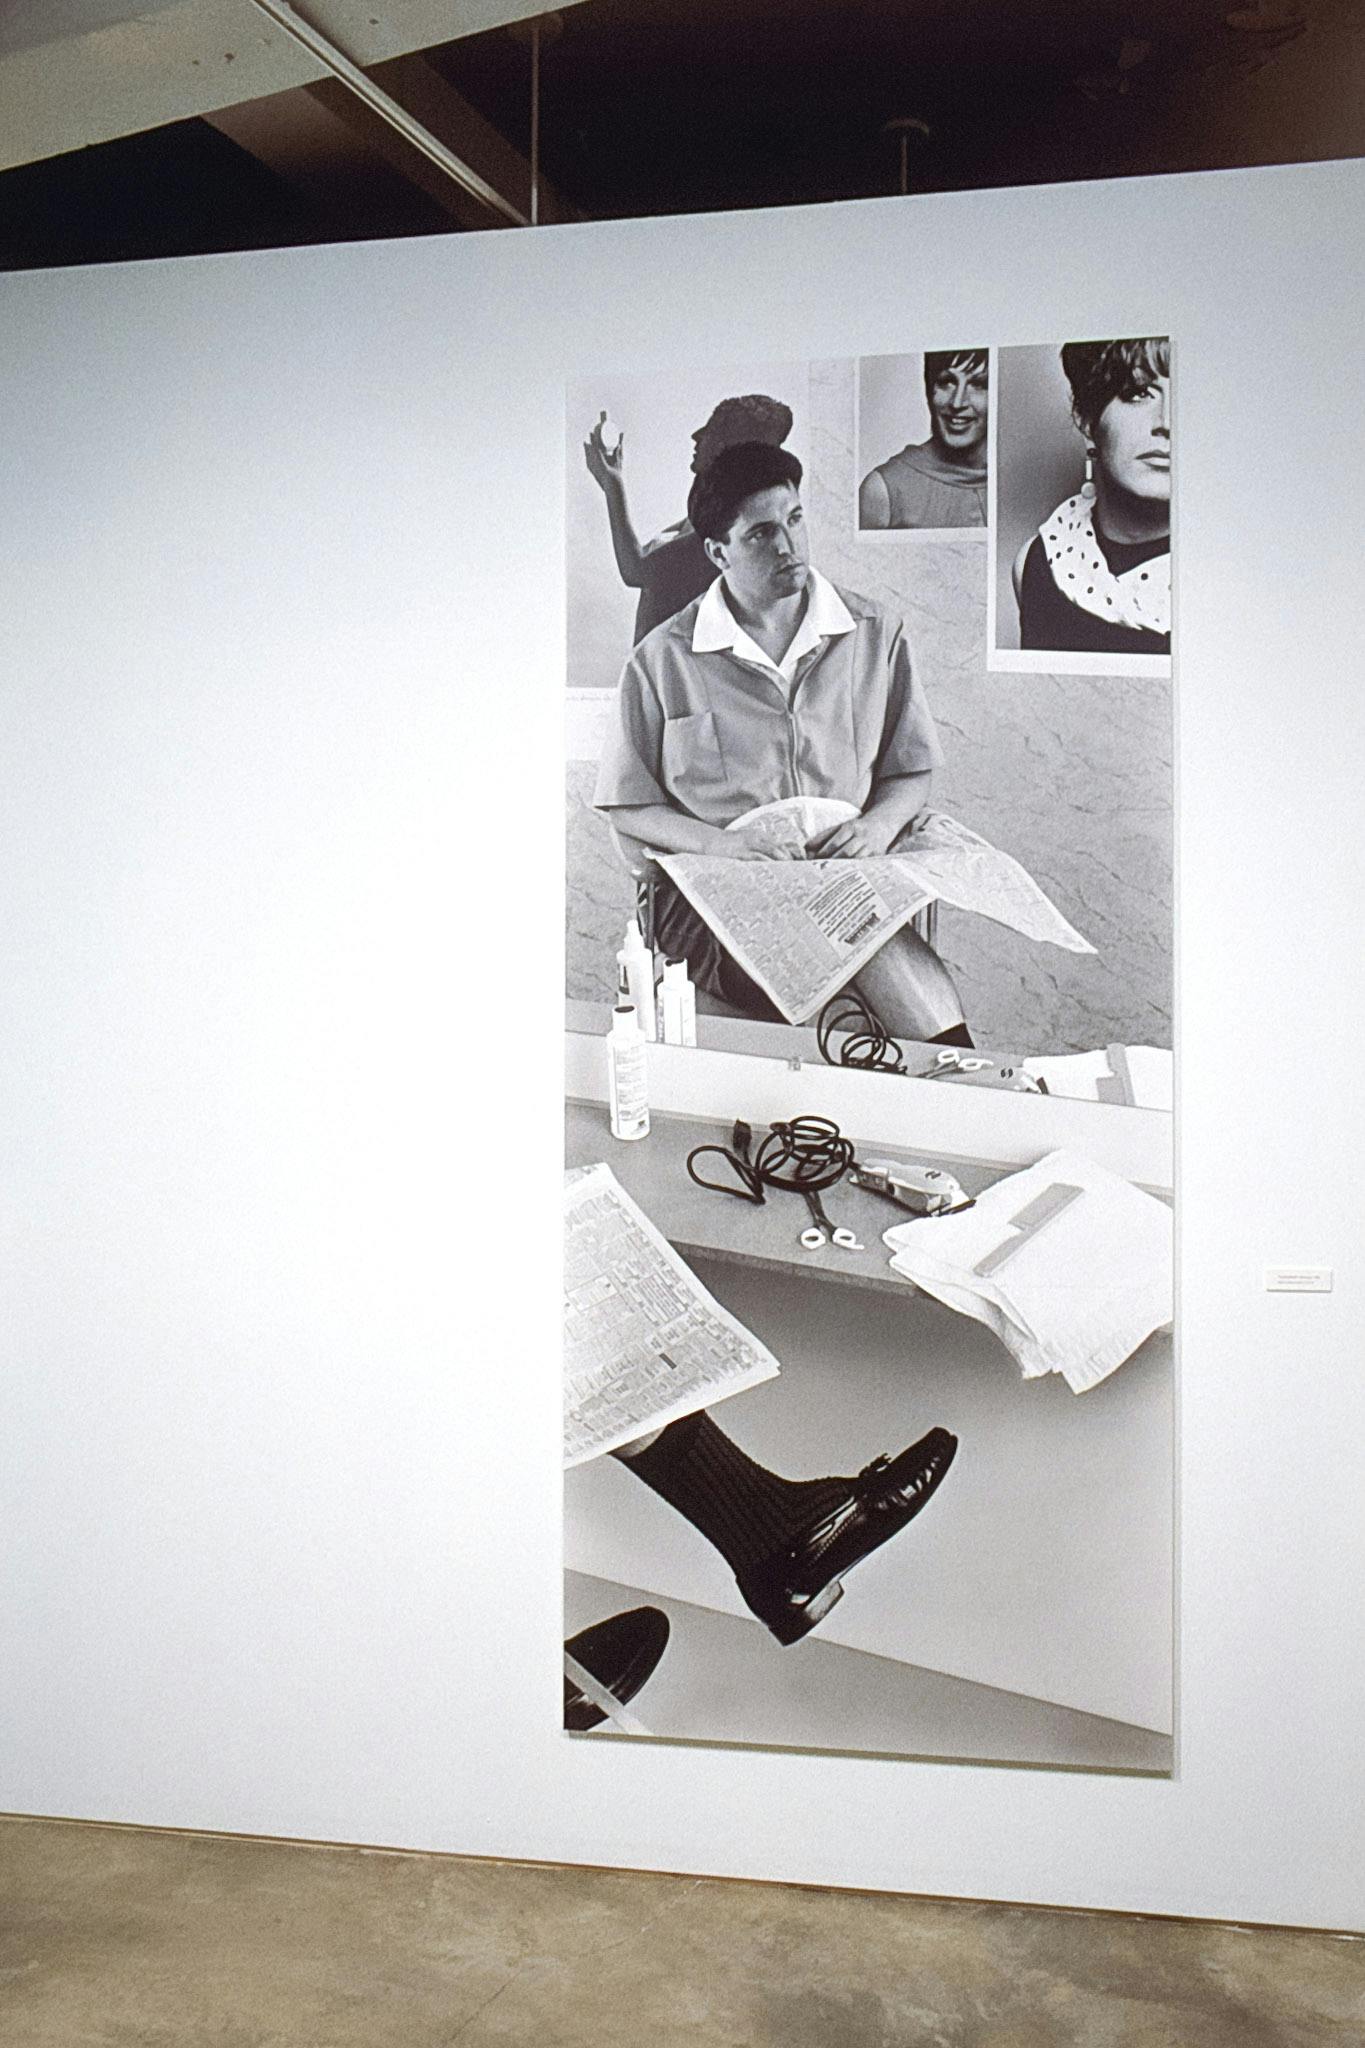 A black and white photograph is installed on the gallery wall. In this tall rectangular-shaped photo, a man sits on a chair in front of a large mirror. He looks away from the newspaper on his lap.  